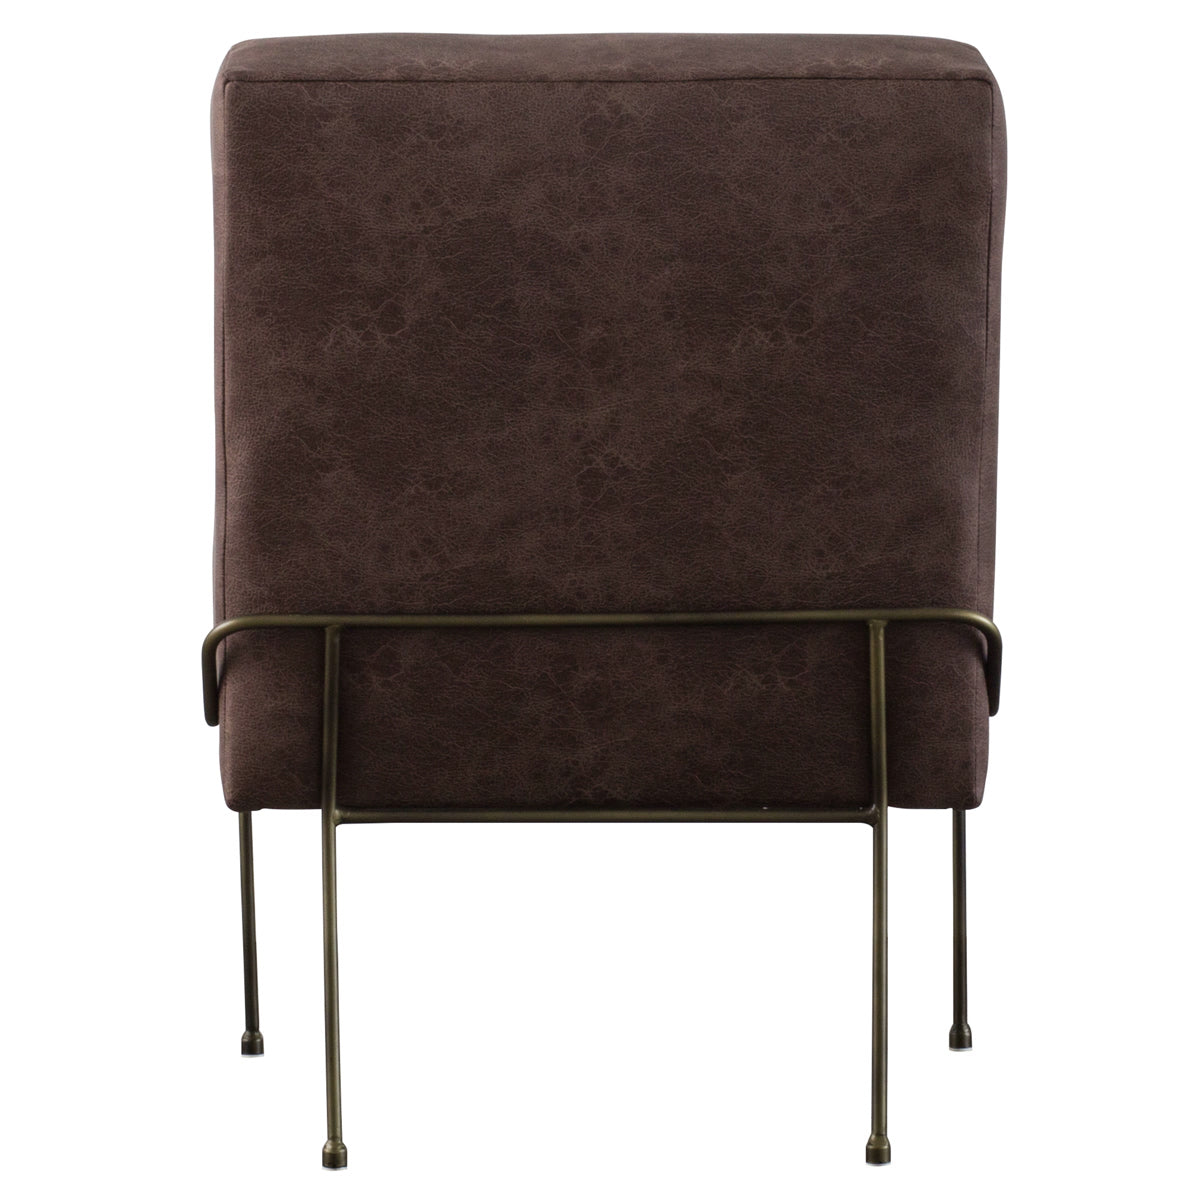 James PU Leather Chair by New Pacific Direct - 9900018